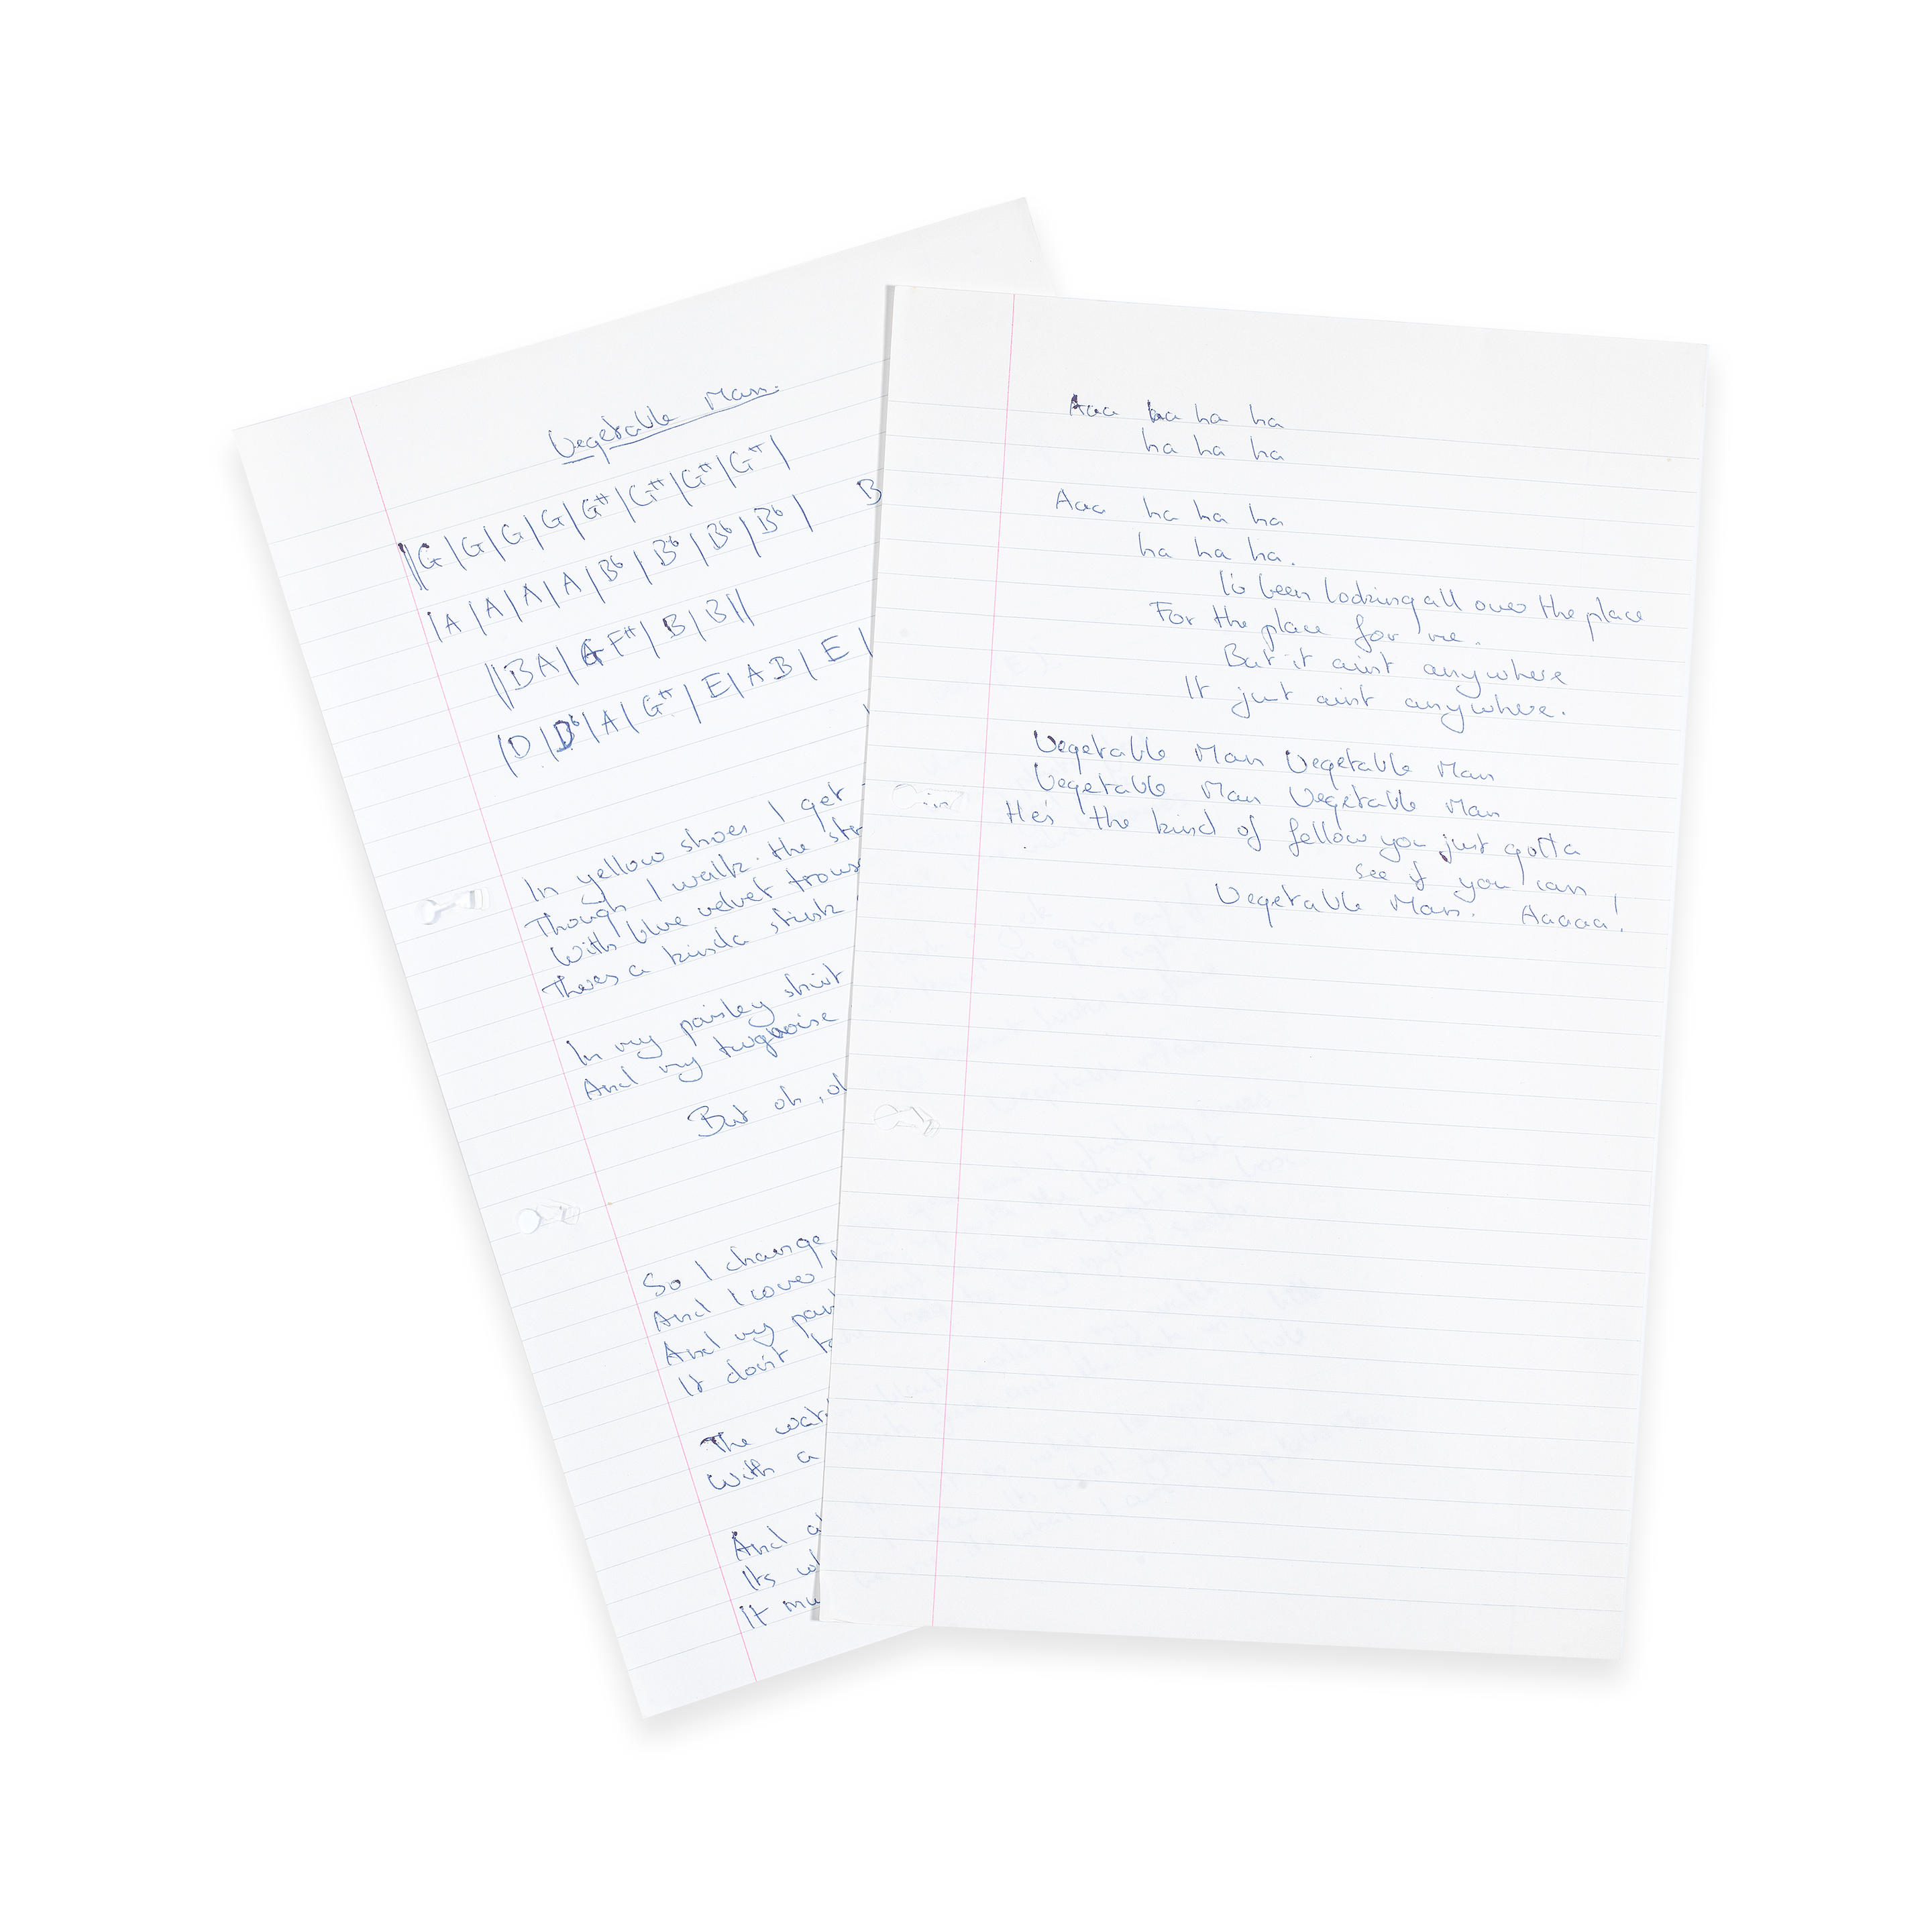 Phil Collins – Handwritten Lyrics For “Another Day In Paradise